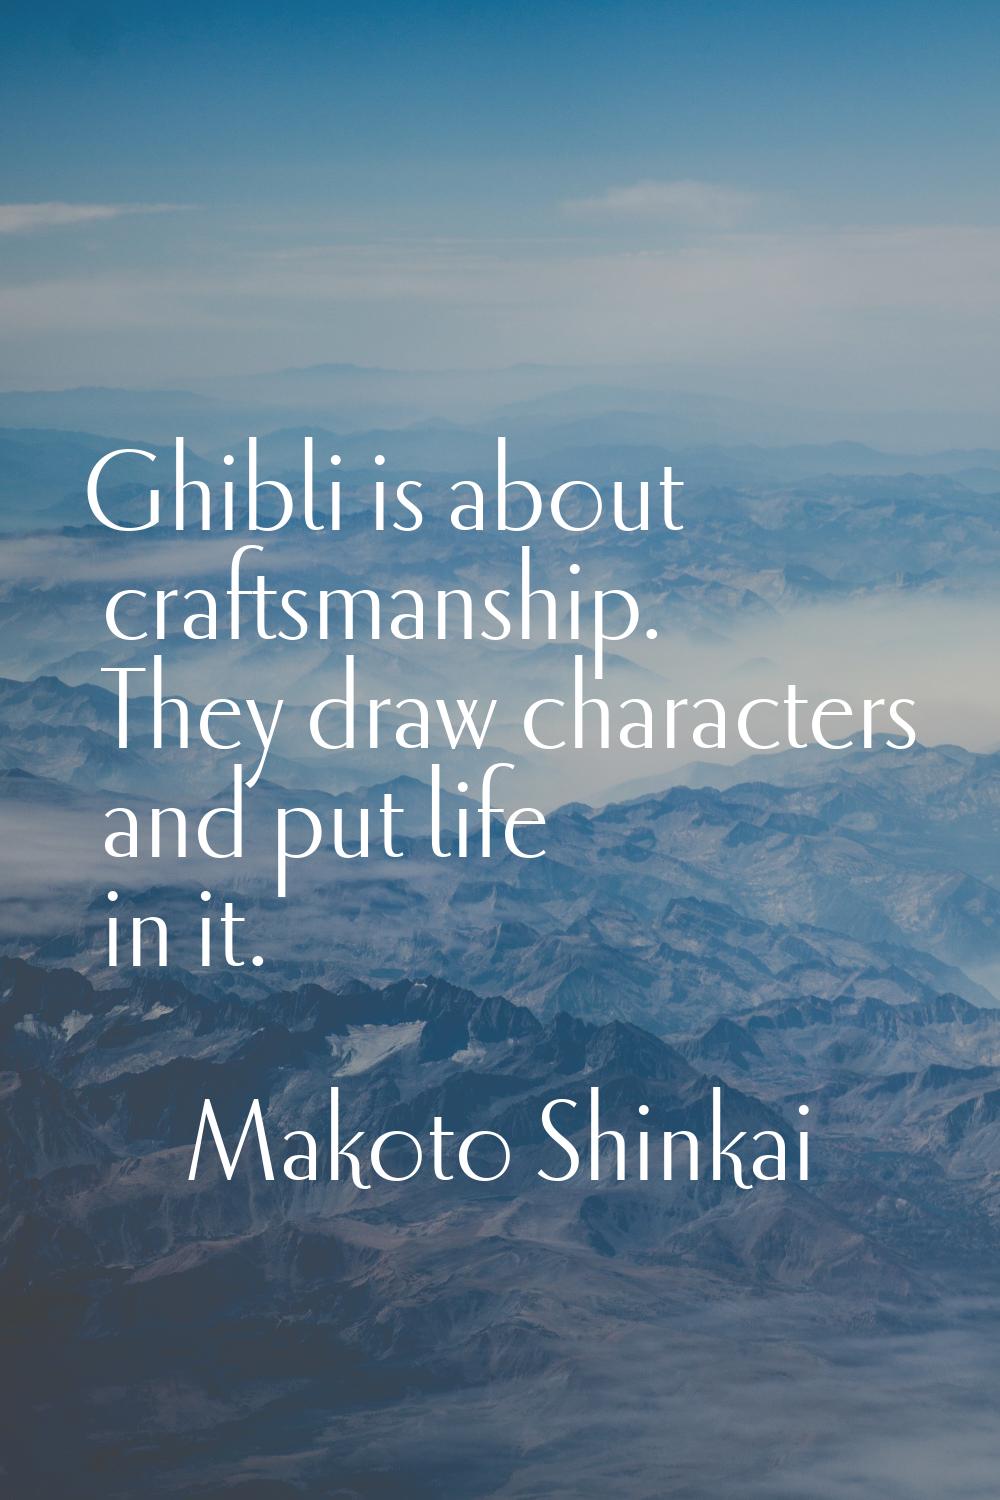 Ghibli is about craftsmanship. They draw characters and put life in it.